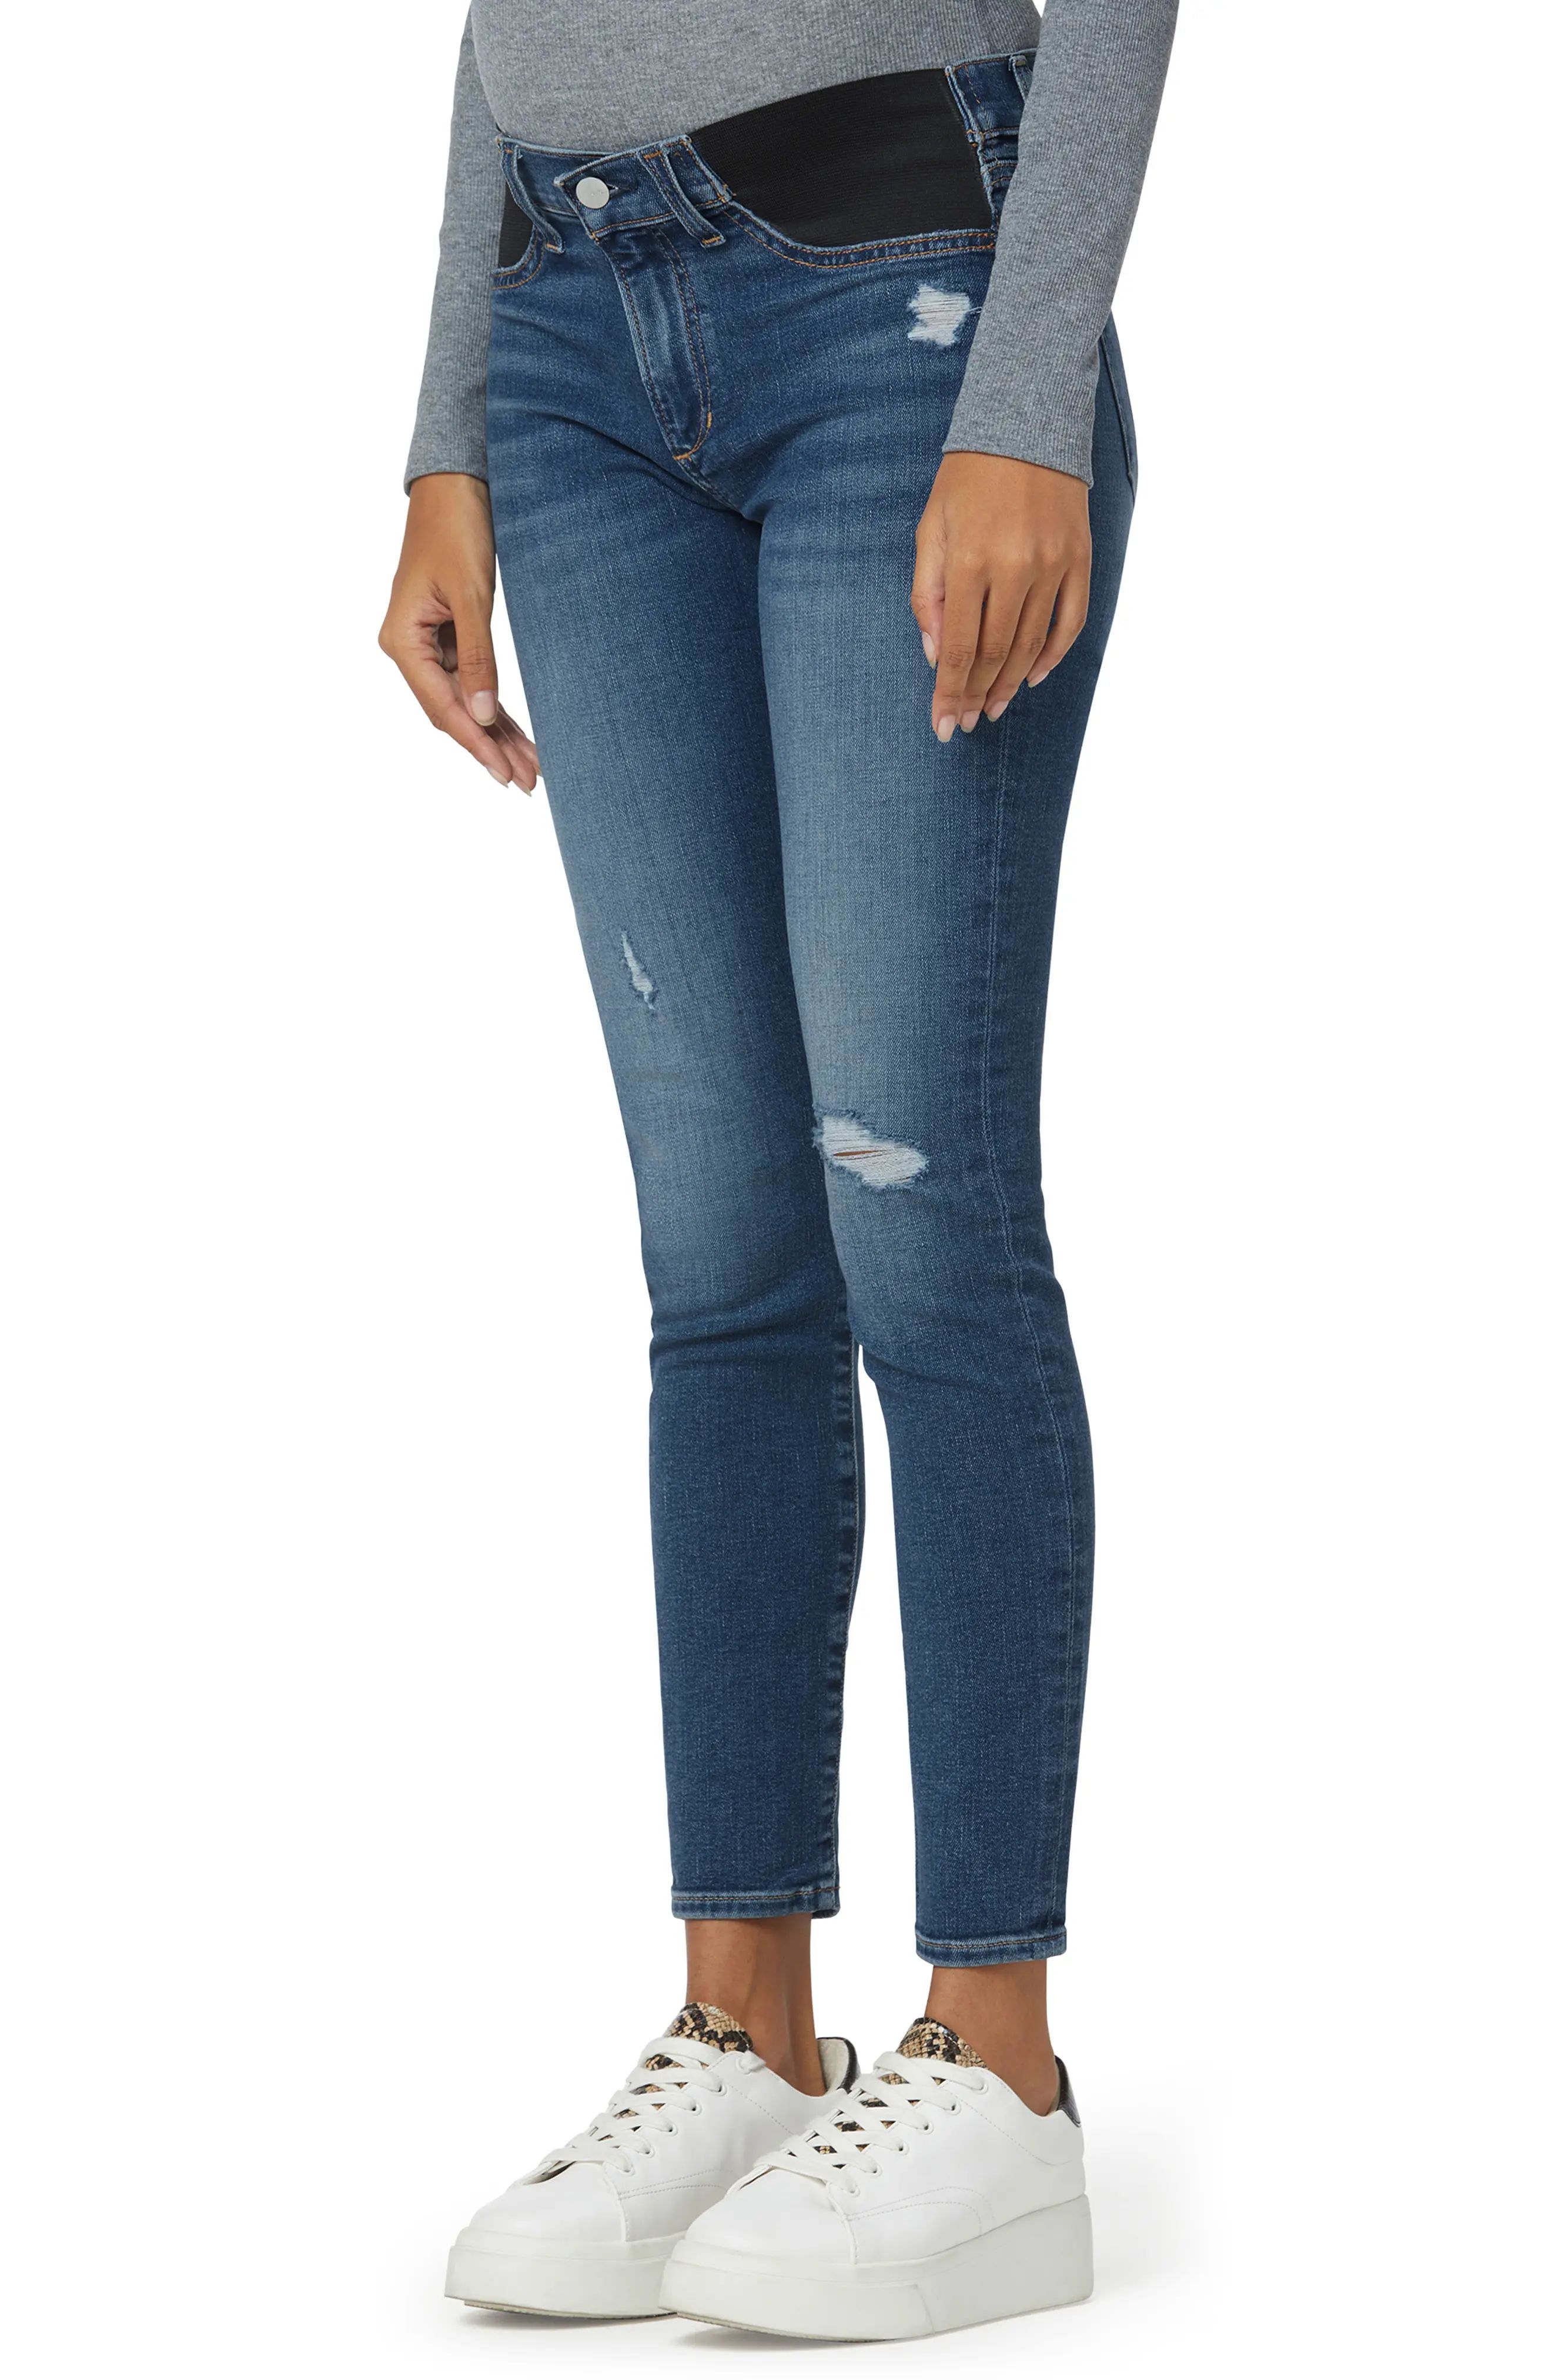 Joe's The Icon Distressed Ankle Skinny Maternity Jeans in Bledsoe at Nordstrom, Size 28 | Nordstrom